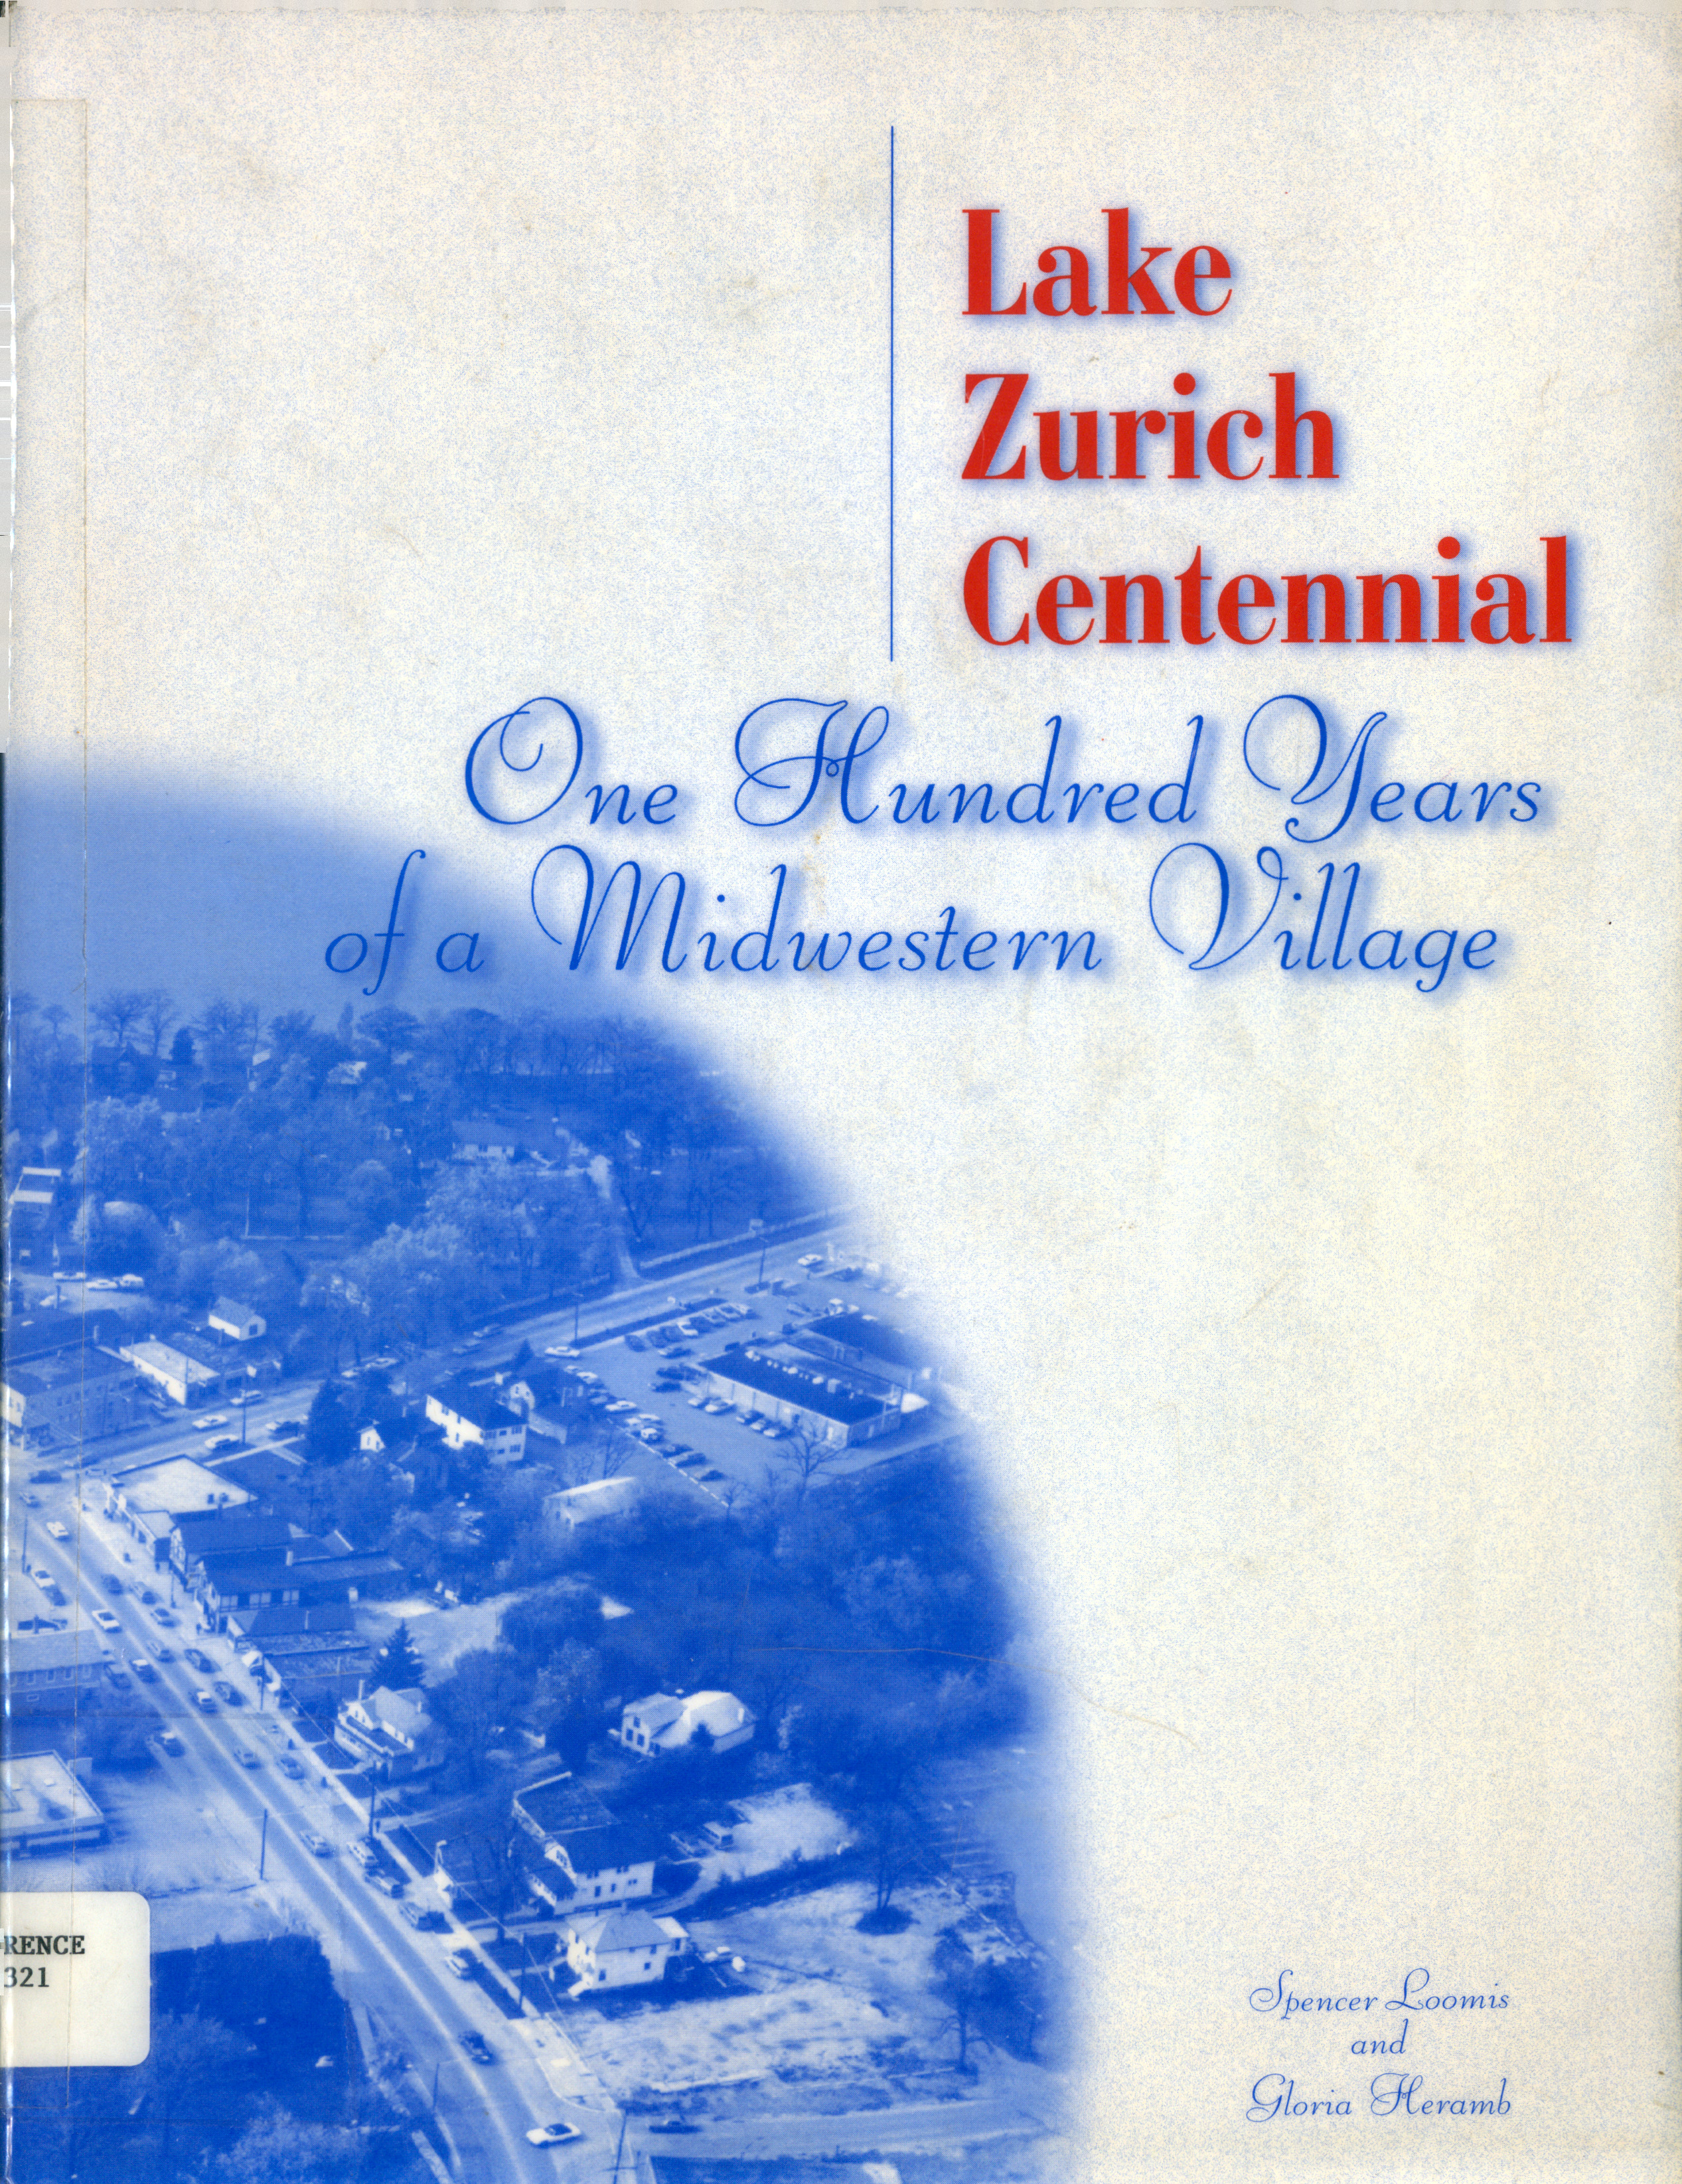 Image for "Lake Zurich Centennial: One Hundred Years of a Midwestern Village"